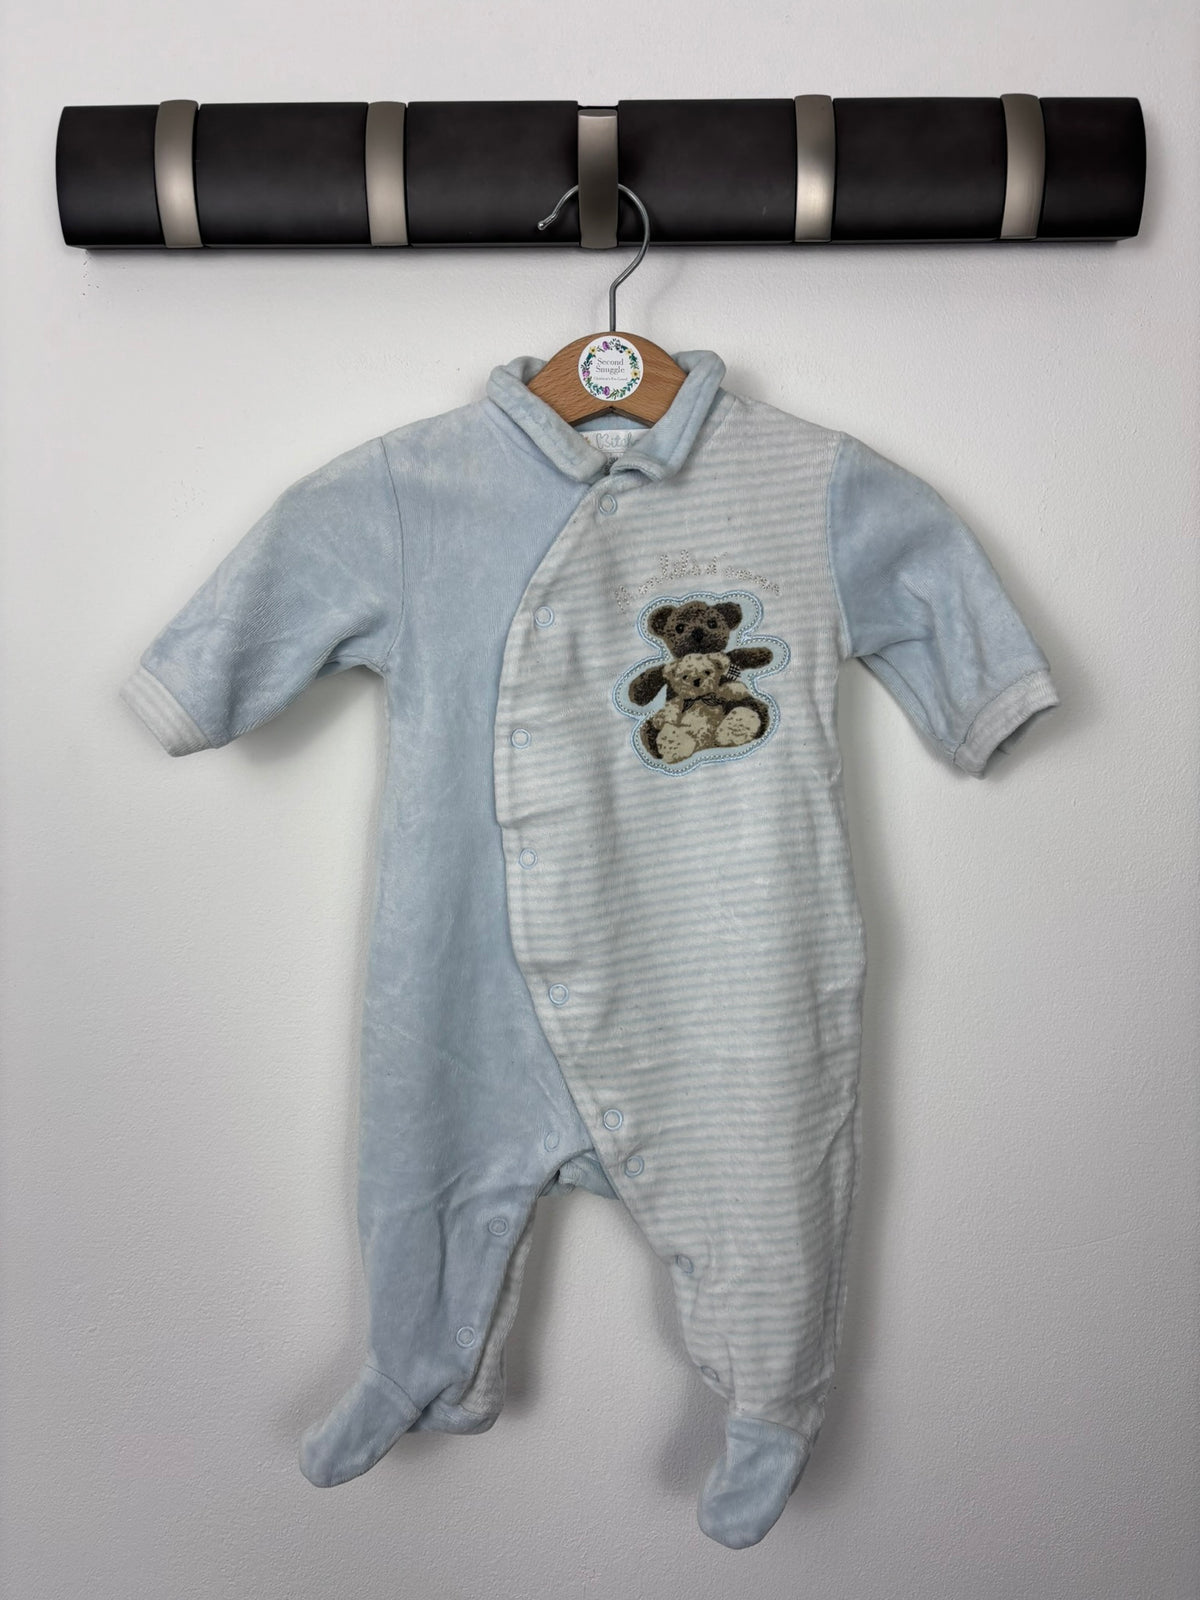 Kitchoun 3 Months-Sleepsuits-Second Snuggle Preloved